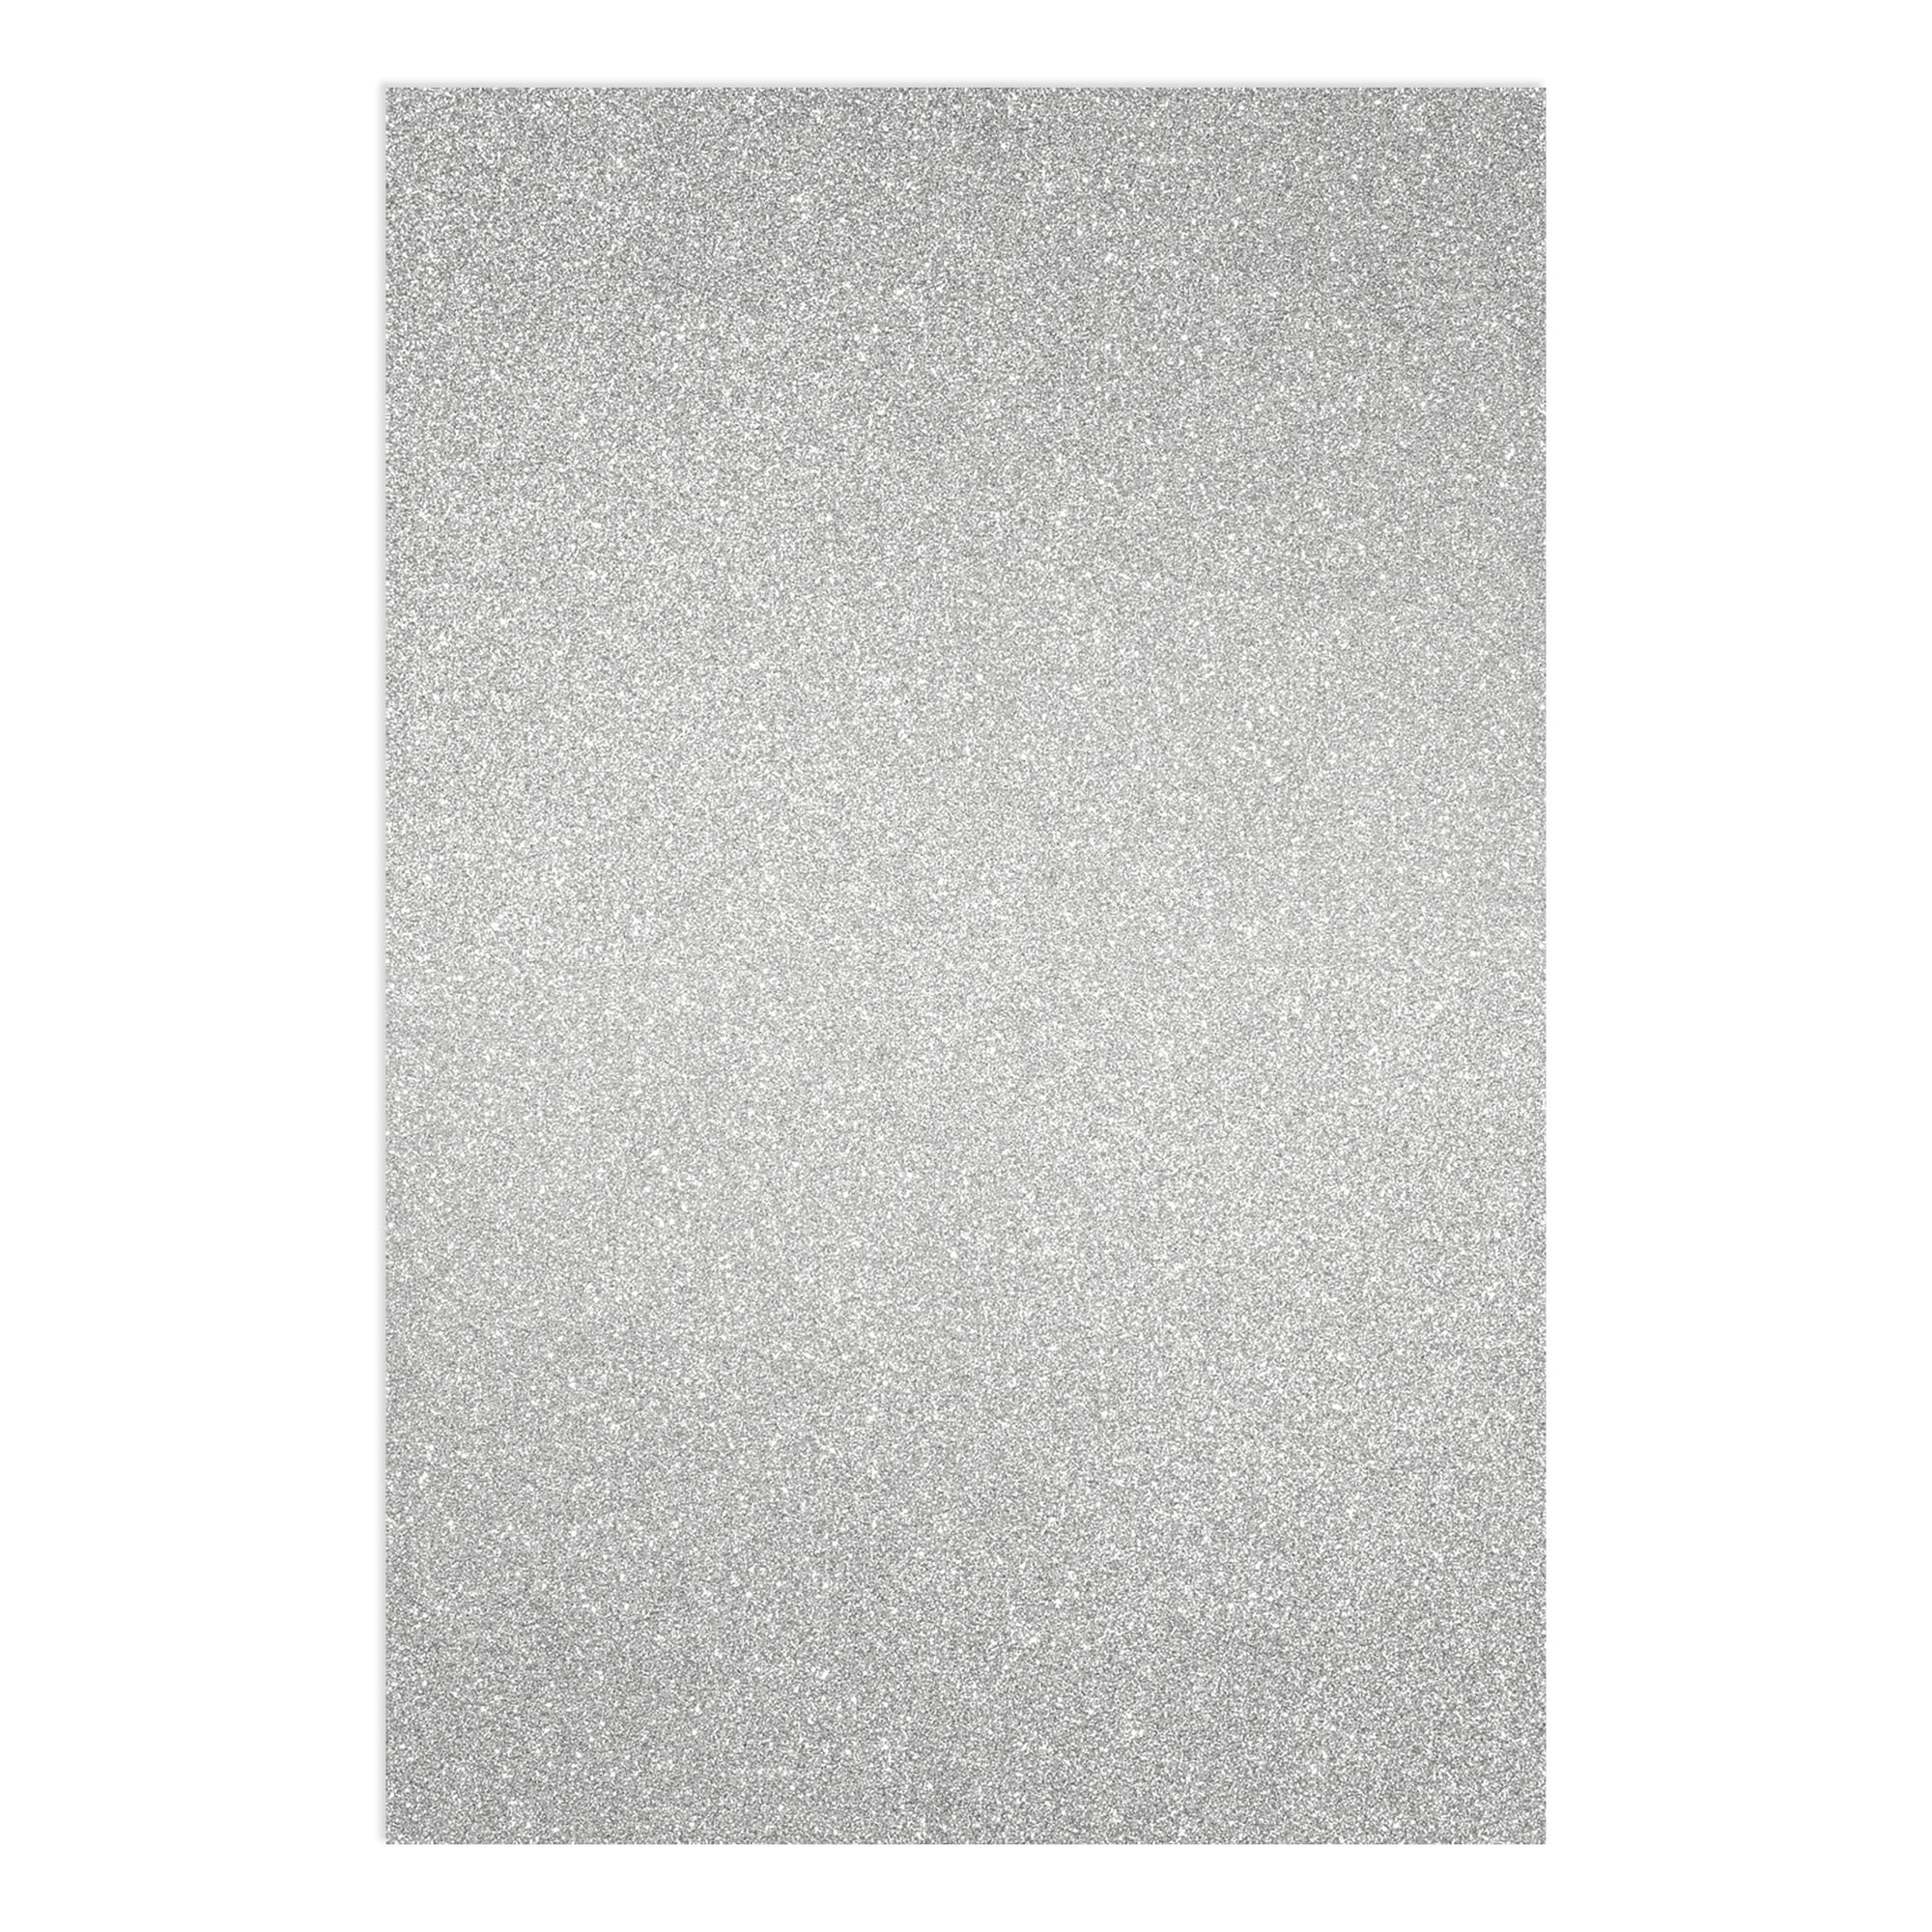  TooMeeCrafts 12 Inches by 12 Inches Glitter Cardstock